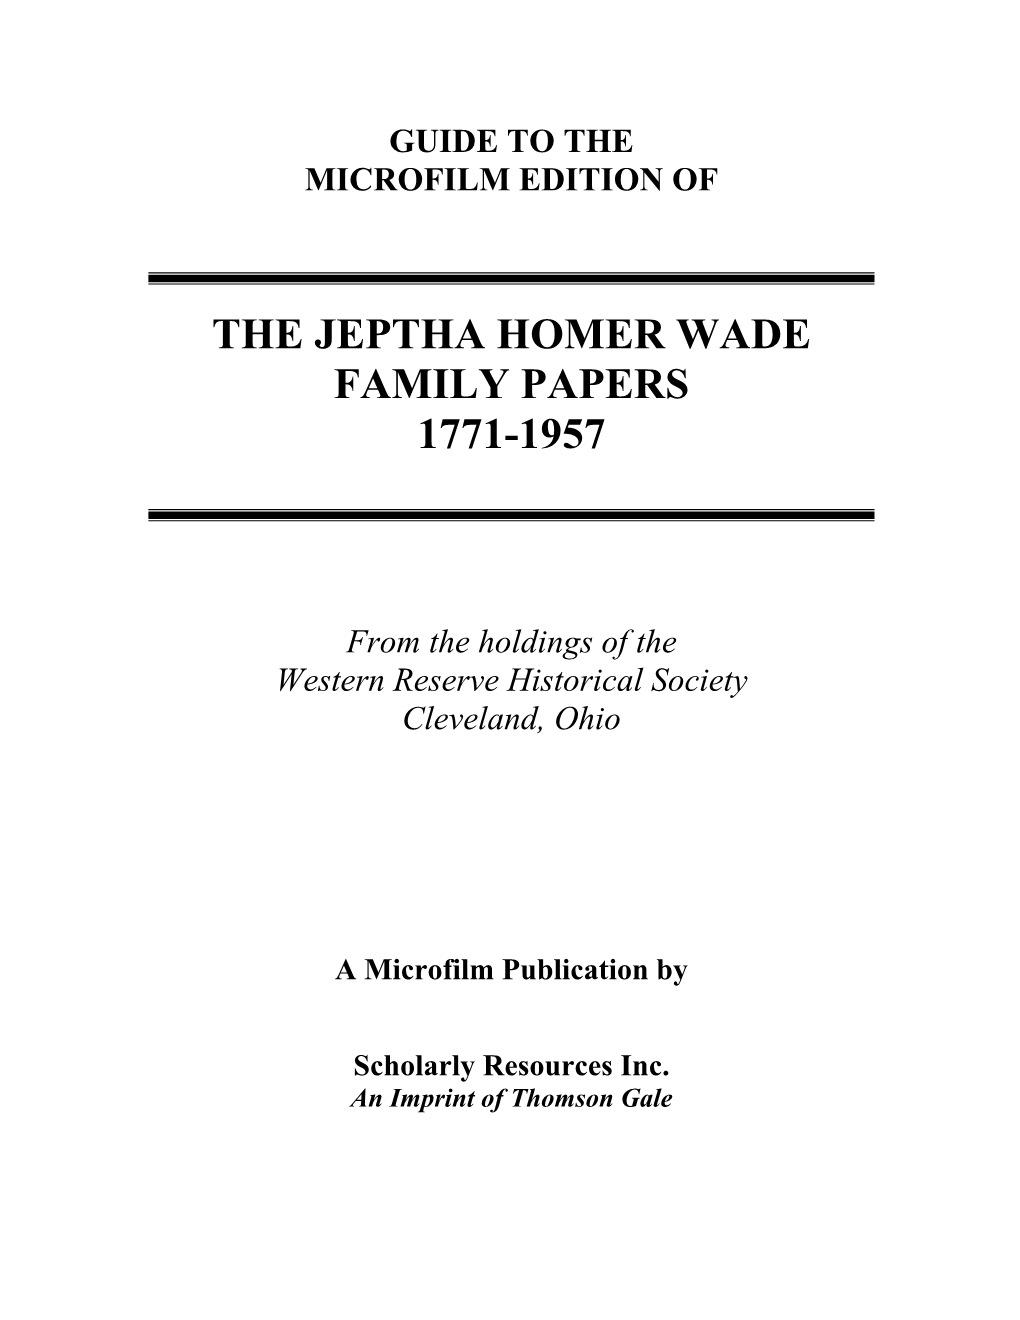 The Jeptha Homer Wade Family Papers 1771-1957